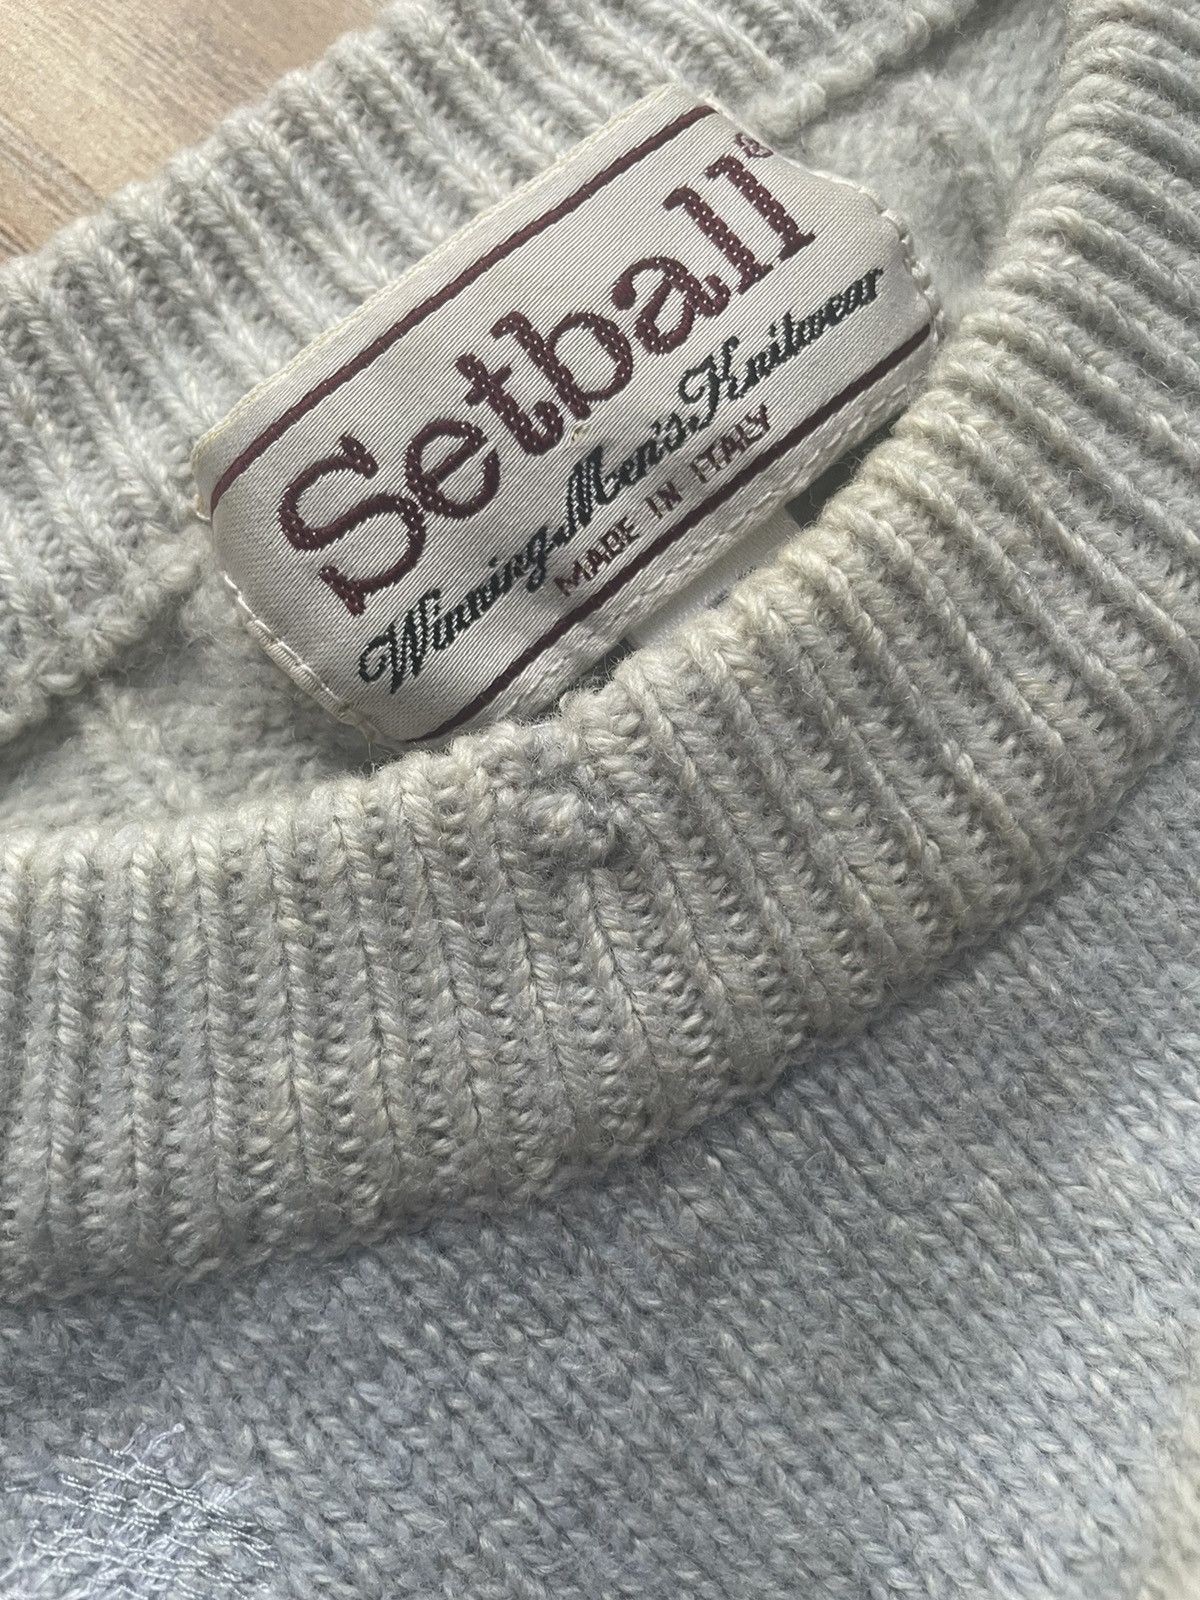 Vintage 🔥KNITTED SWEATER MADE IN ITALY, SETBALL, NEW YEAR, snow Size US M / EU 48-50 / 2 - 7 Preview